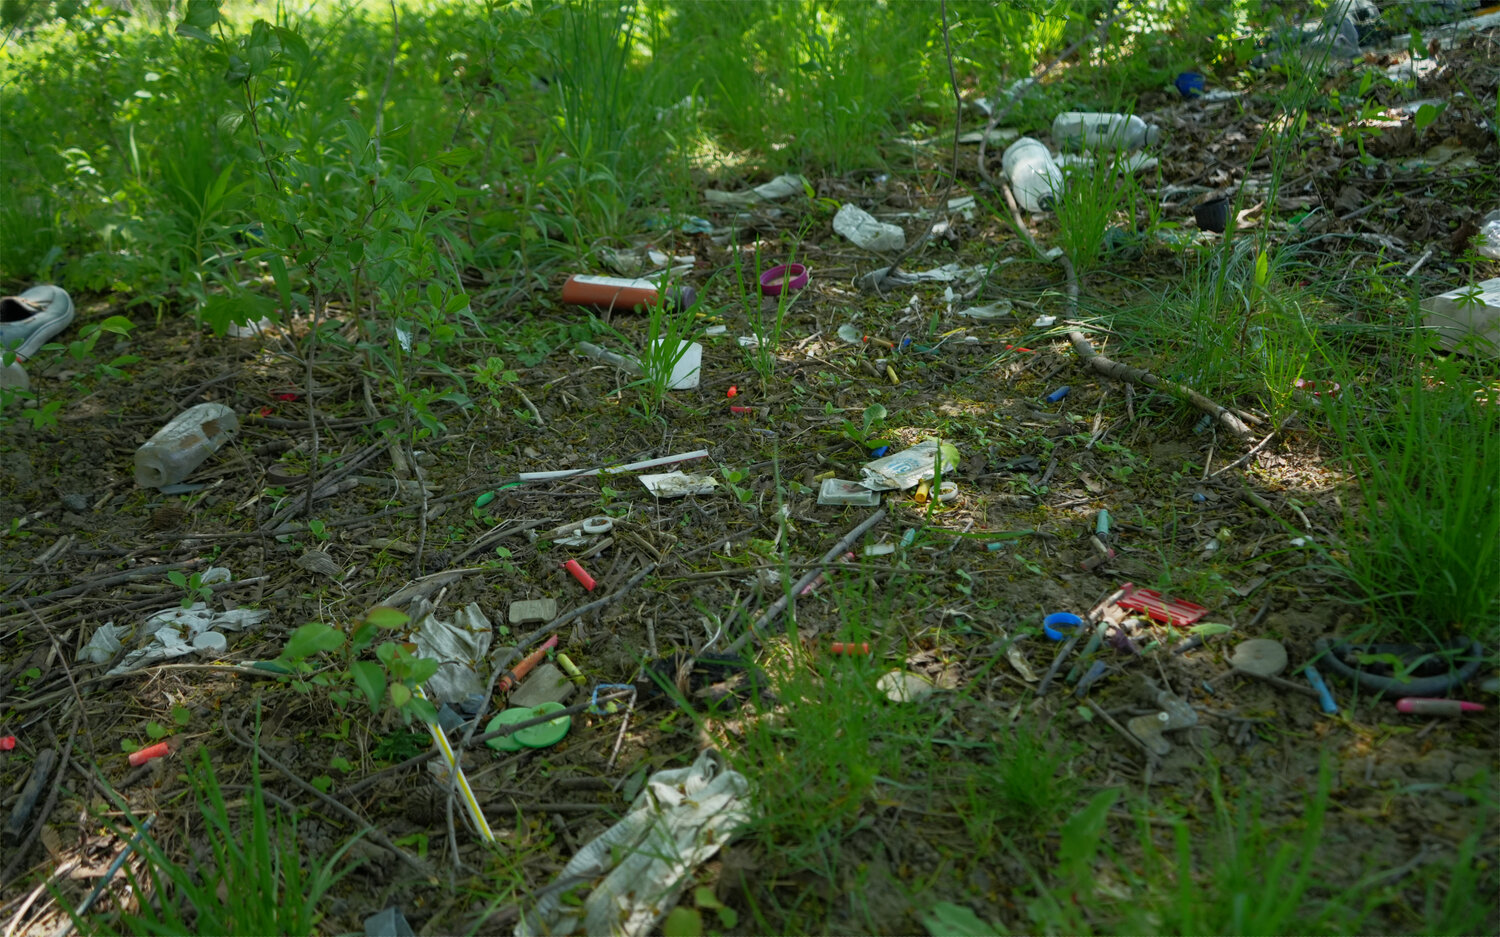 A couple hundred yards from a homeless encampment, personal items are found scattered around a tree, such as: crayons, water bottles, shows, body wash and cigarettes.